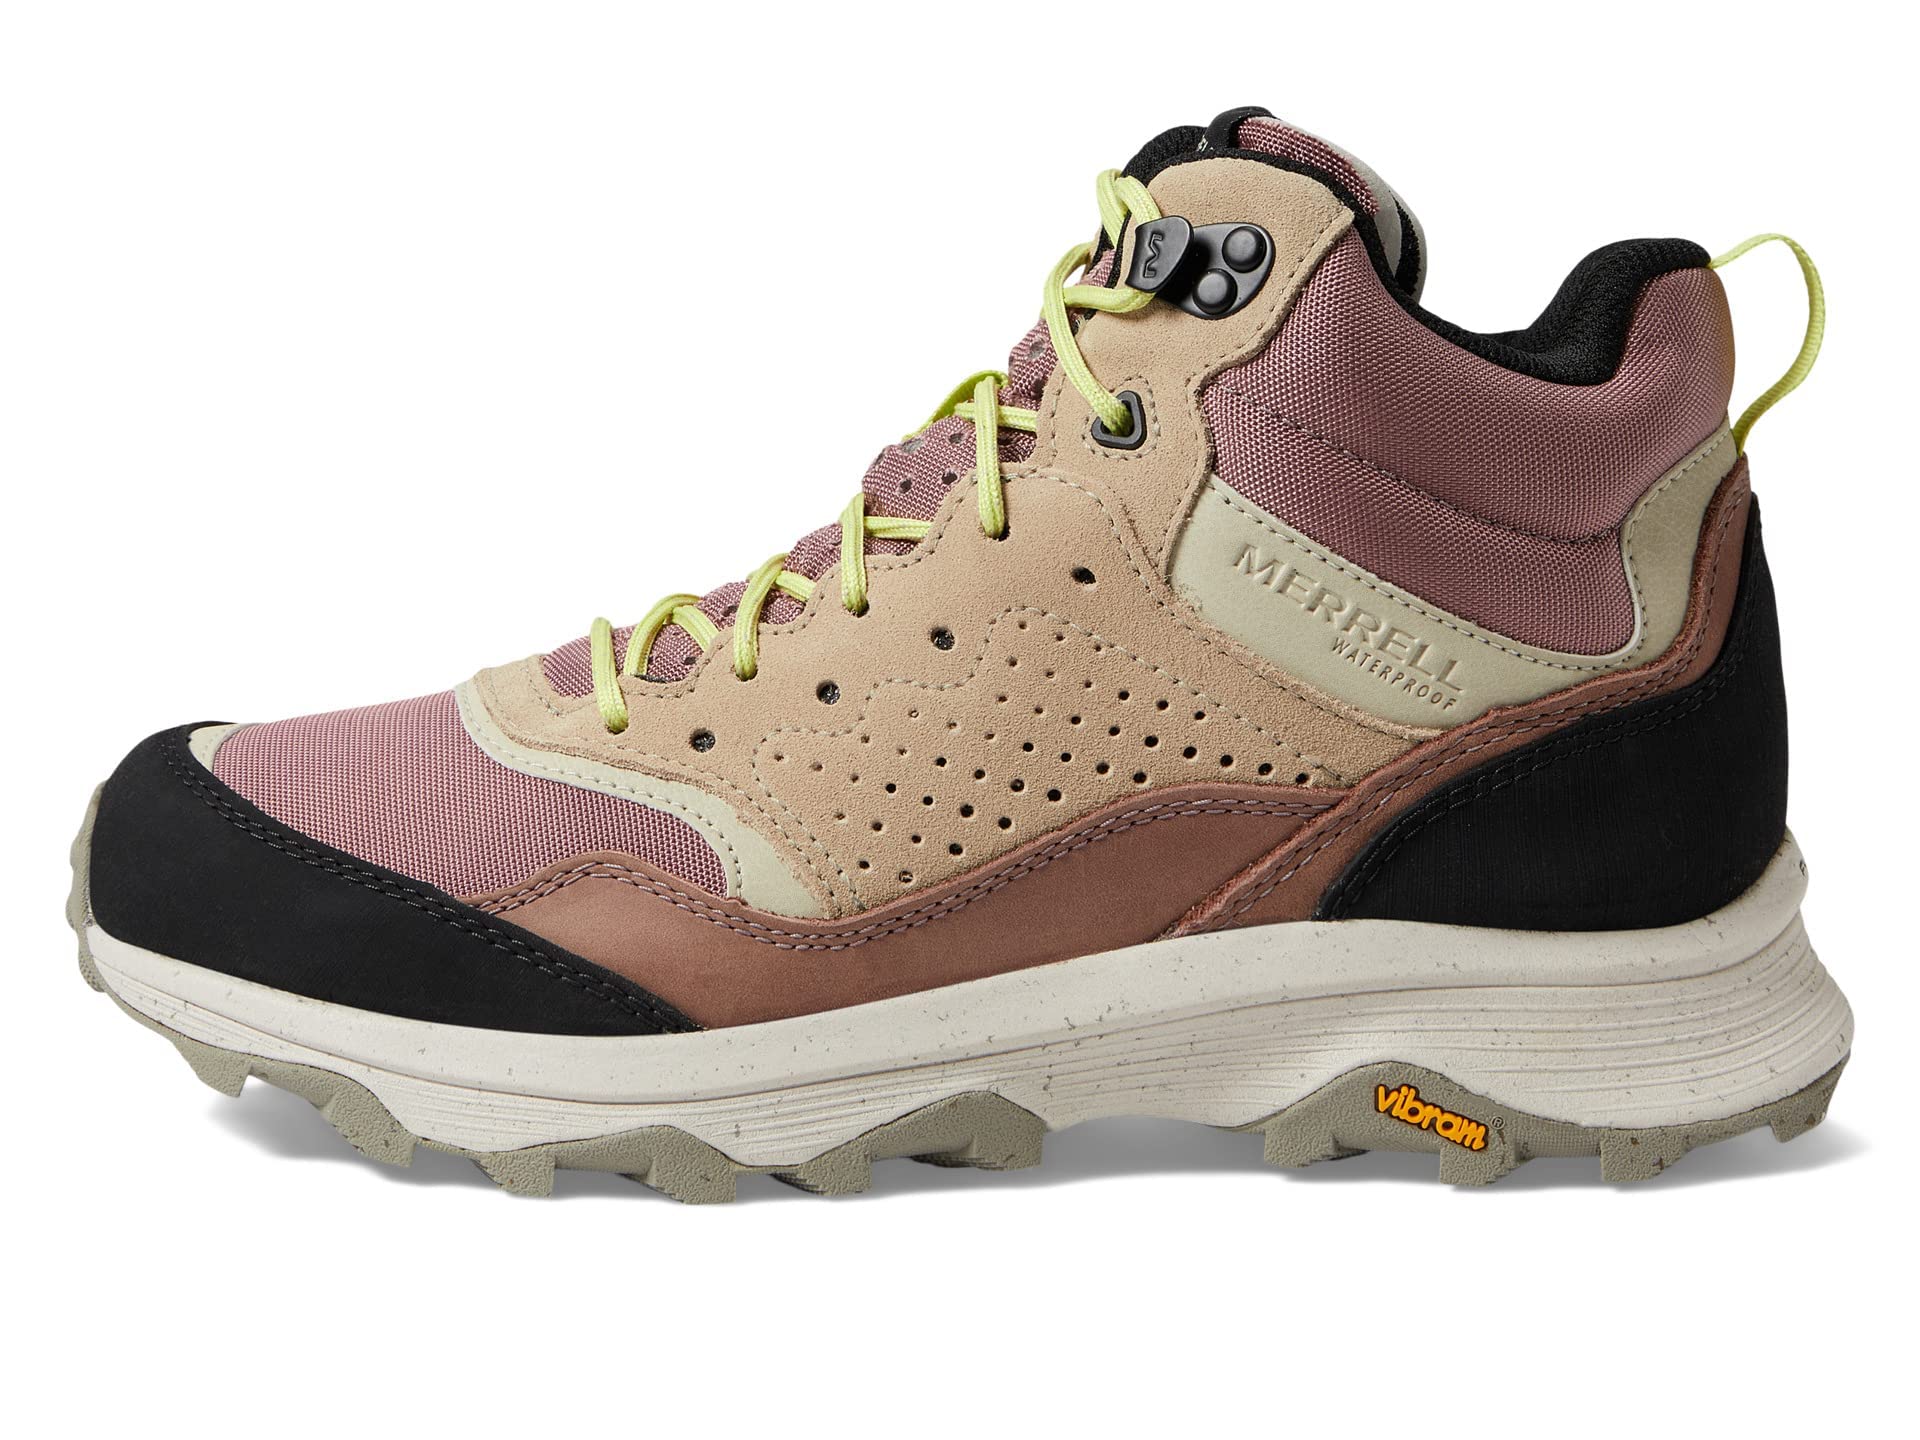 Merrell Speed Solo Mid WP Sneakers for Women - Waterproof Membrane with Hell Pull Tabs, Rugged Street Style Sneakers